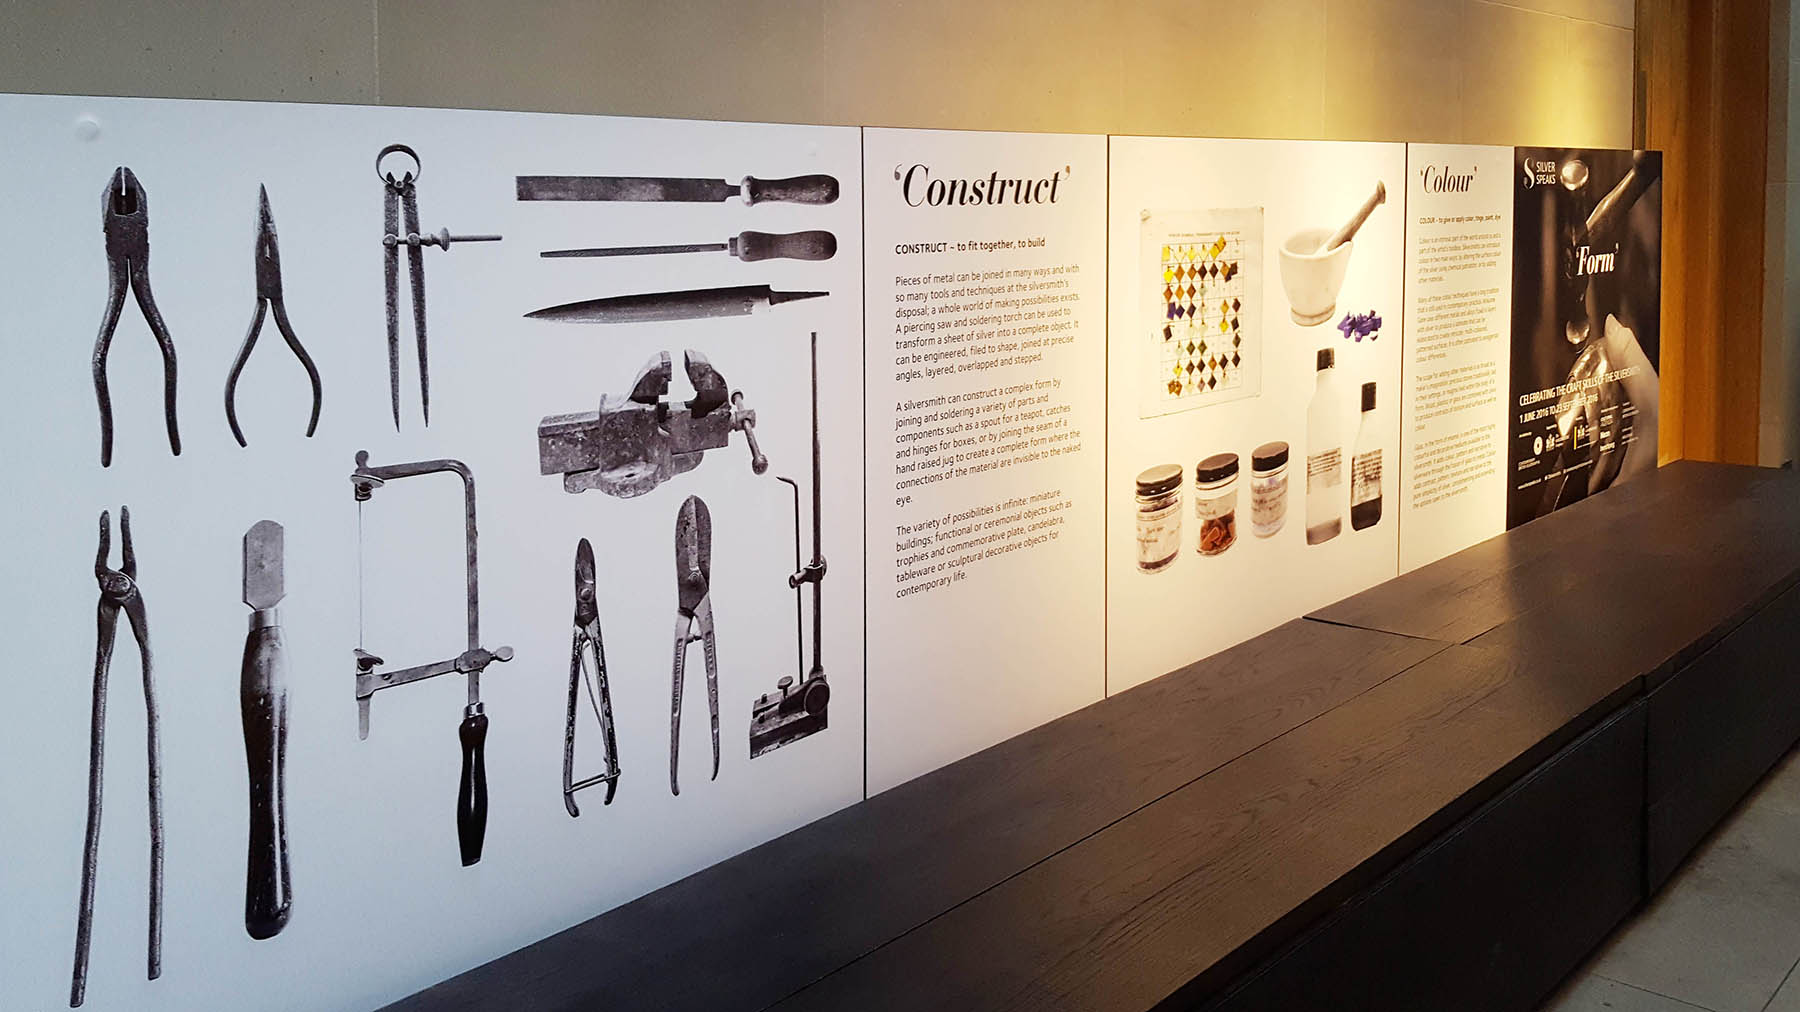 Silver Speaks Form Exhibition wall vinyls showing images of silversmithing tools and information